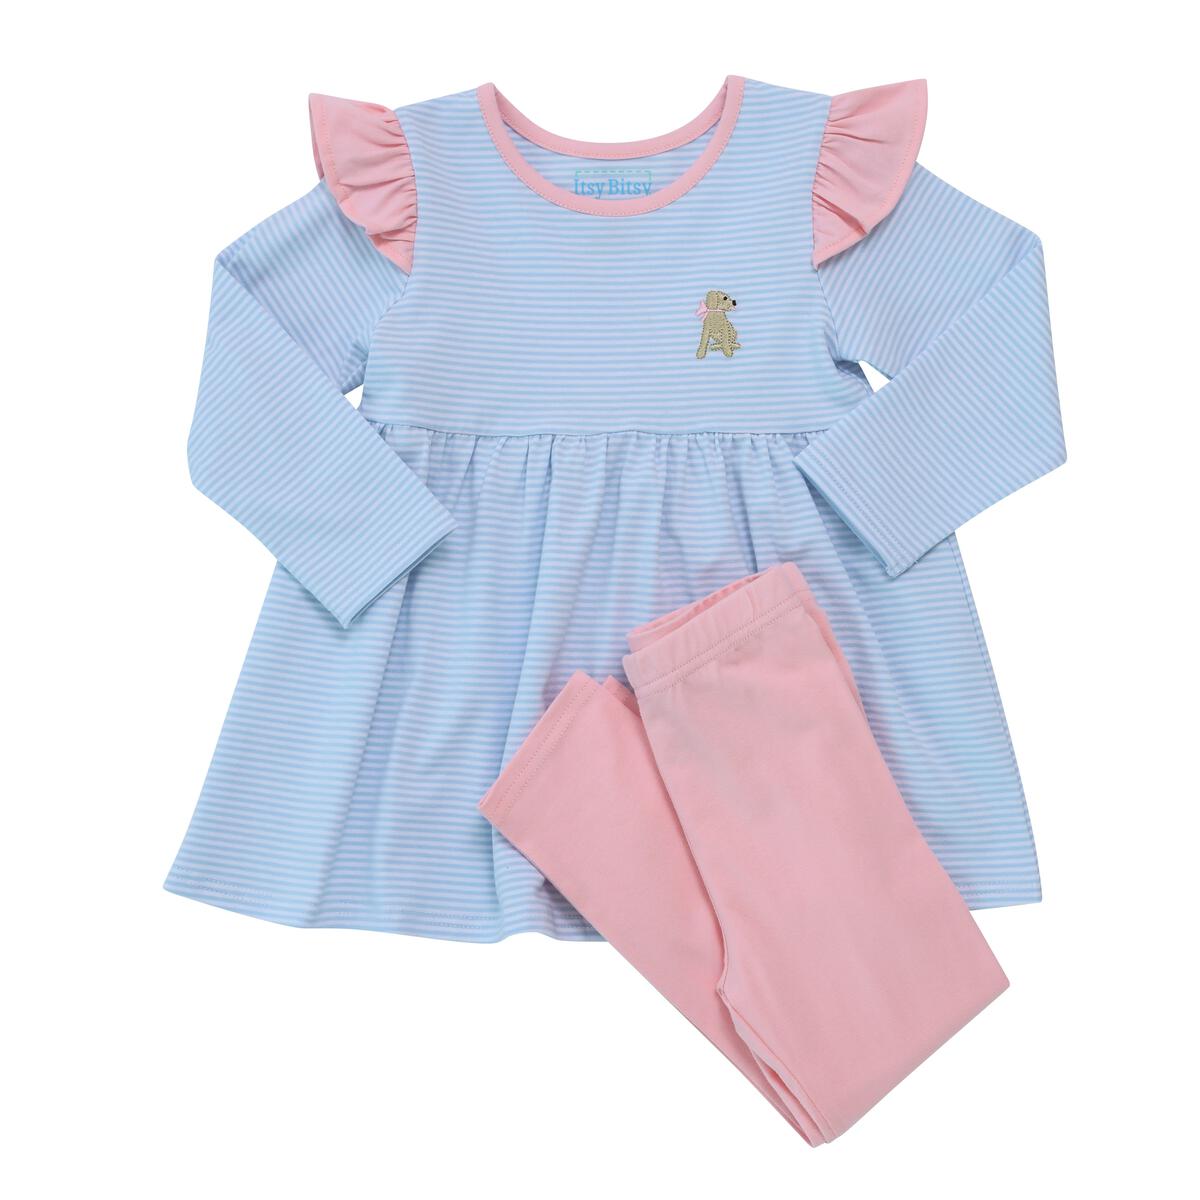 A baby girl's adorable Puppy Ruffle Pant Set by Itsy Bitsy with matching leggings.